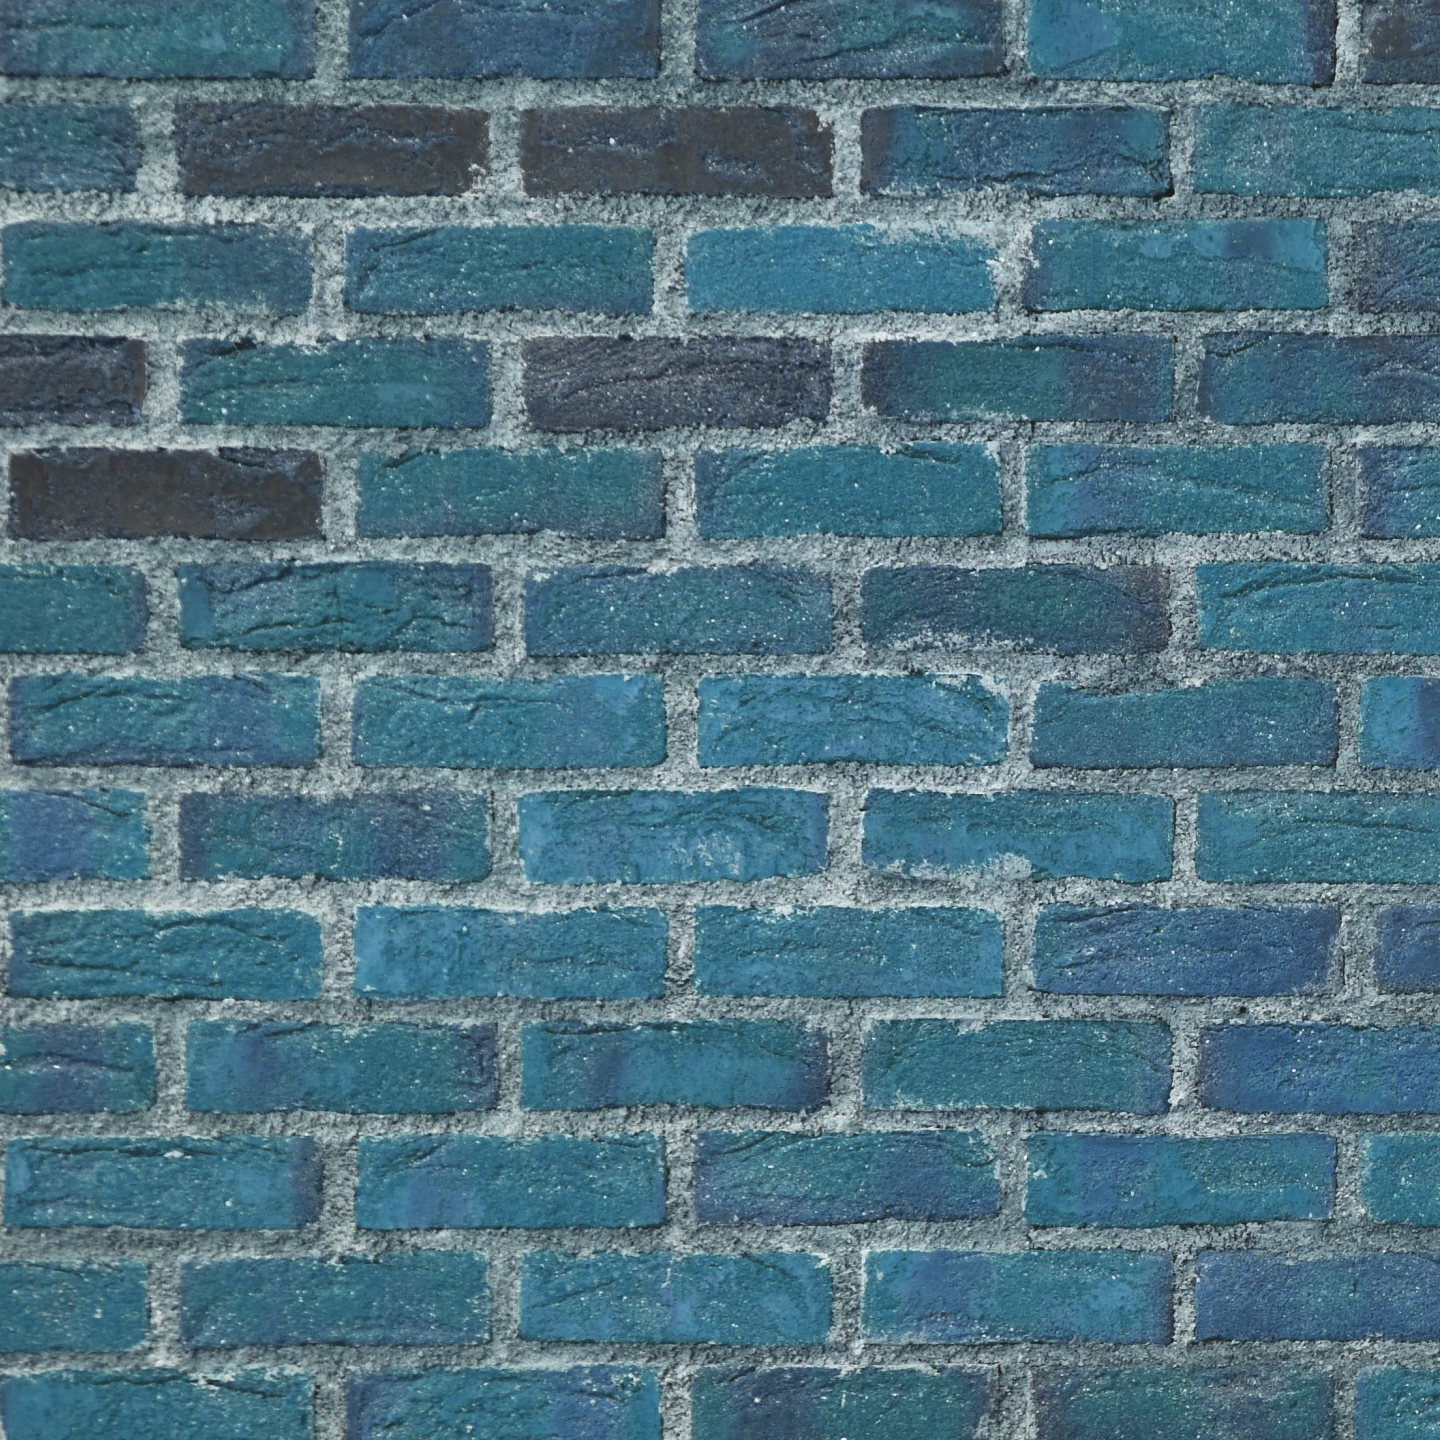 Doodlecraft: Free Colored Brick Wall Backgrounds!